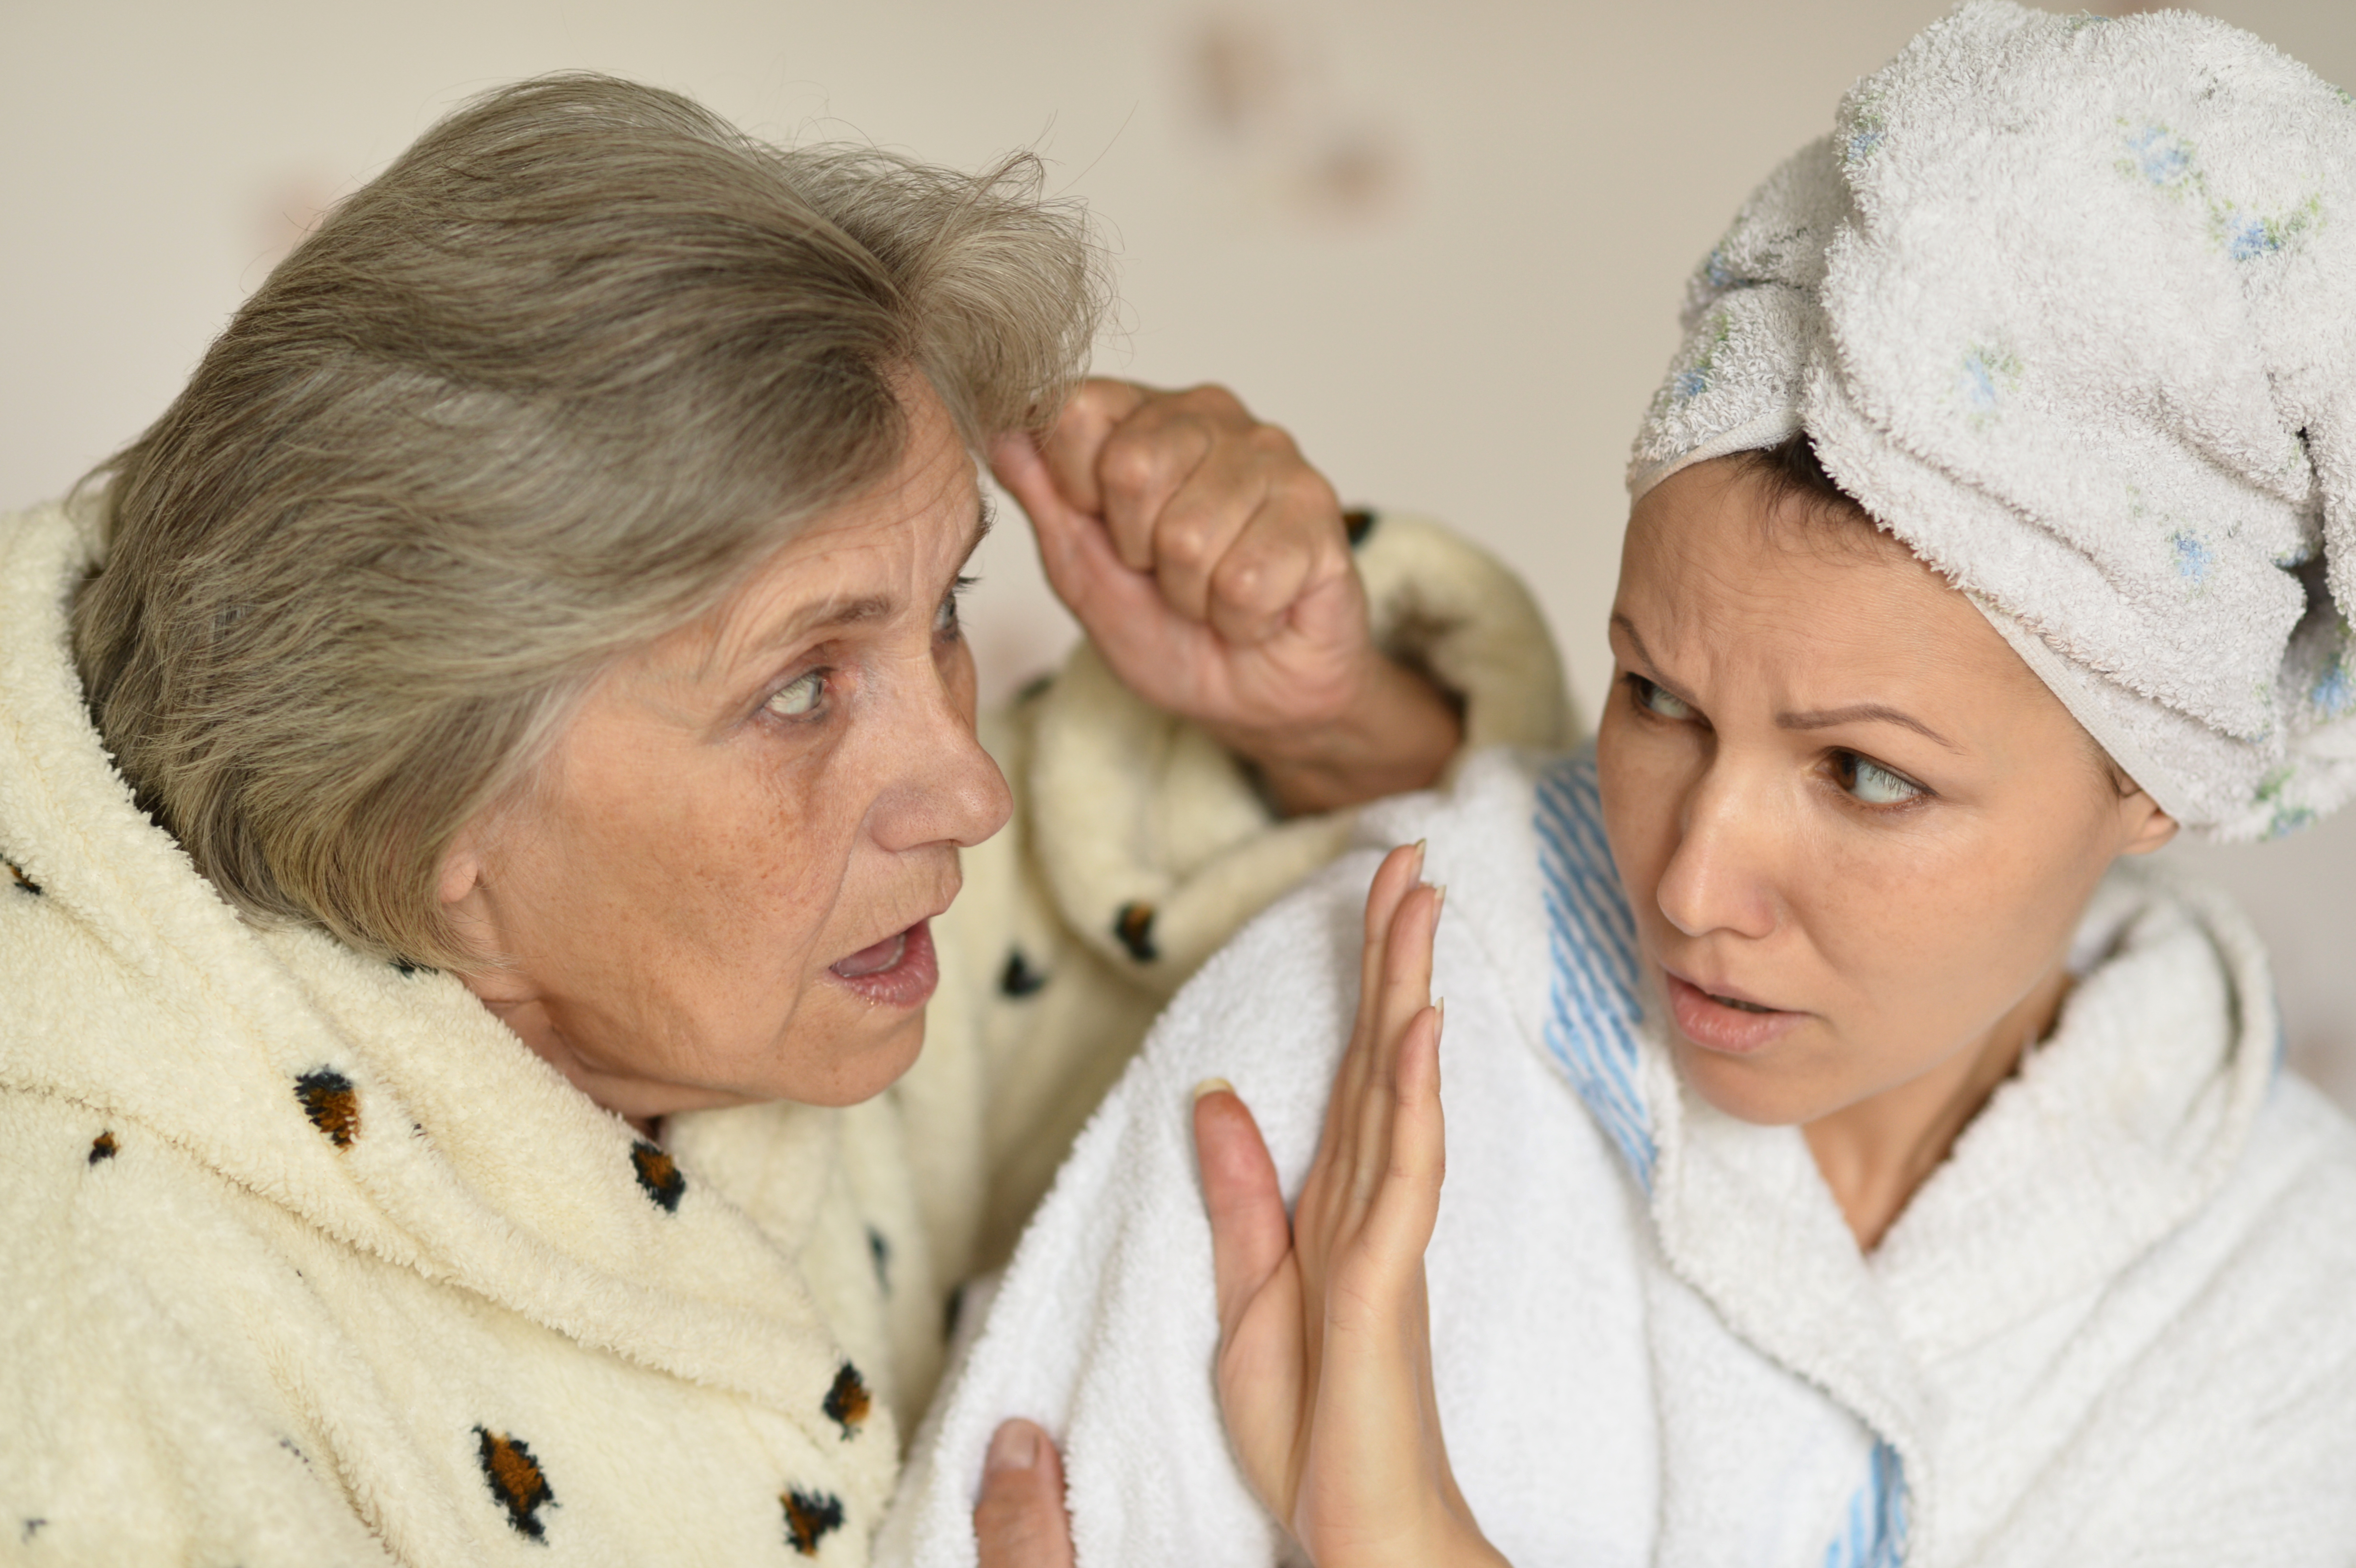 A woman trying to avoid her angry mother-in-law | Source: Shutterstock